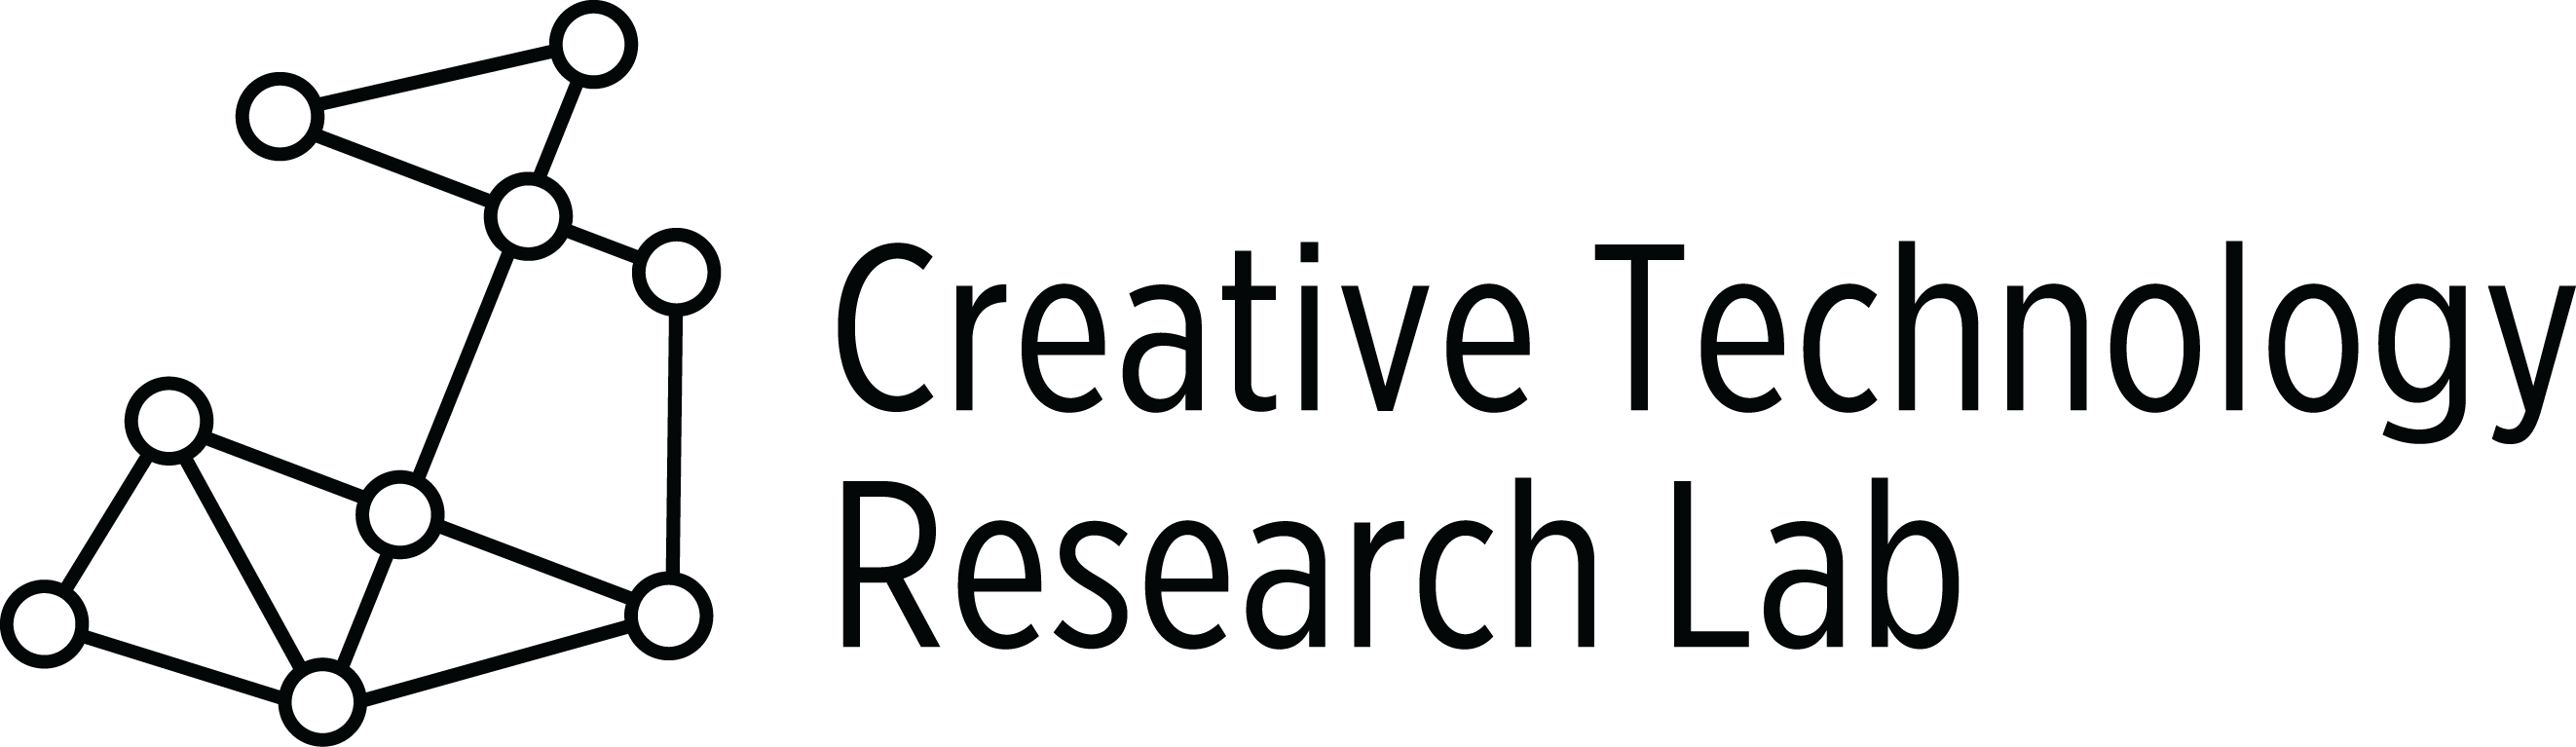 Creative Technology Research Lab